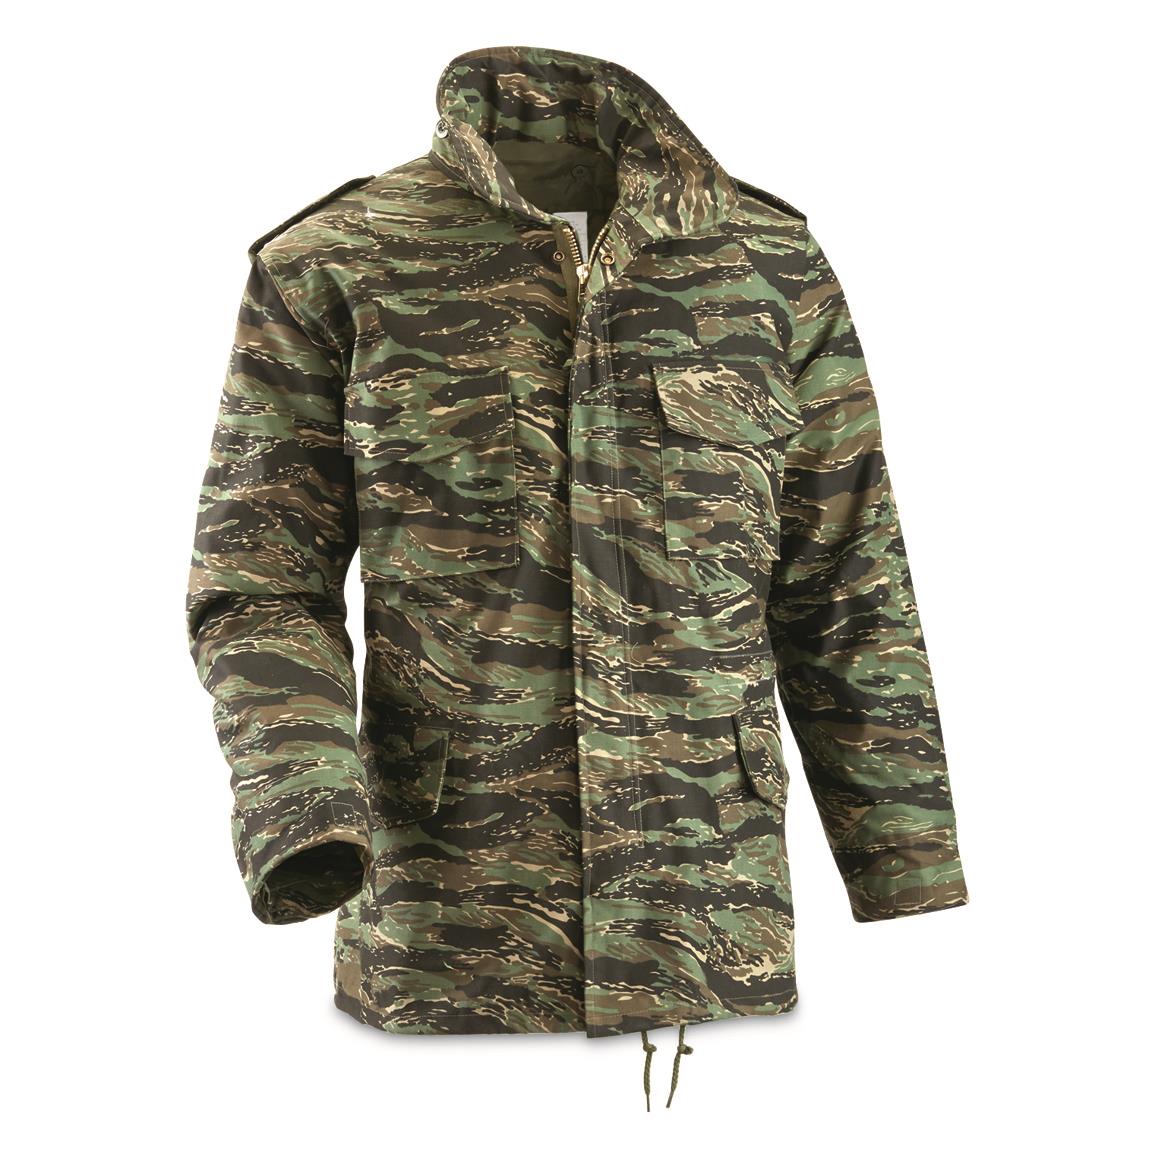 Fox Outdoor M65 Field Jacket with Liner, Tiger Stripe